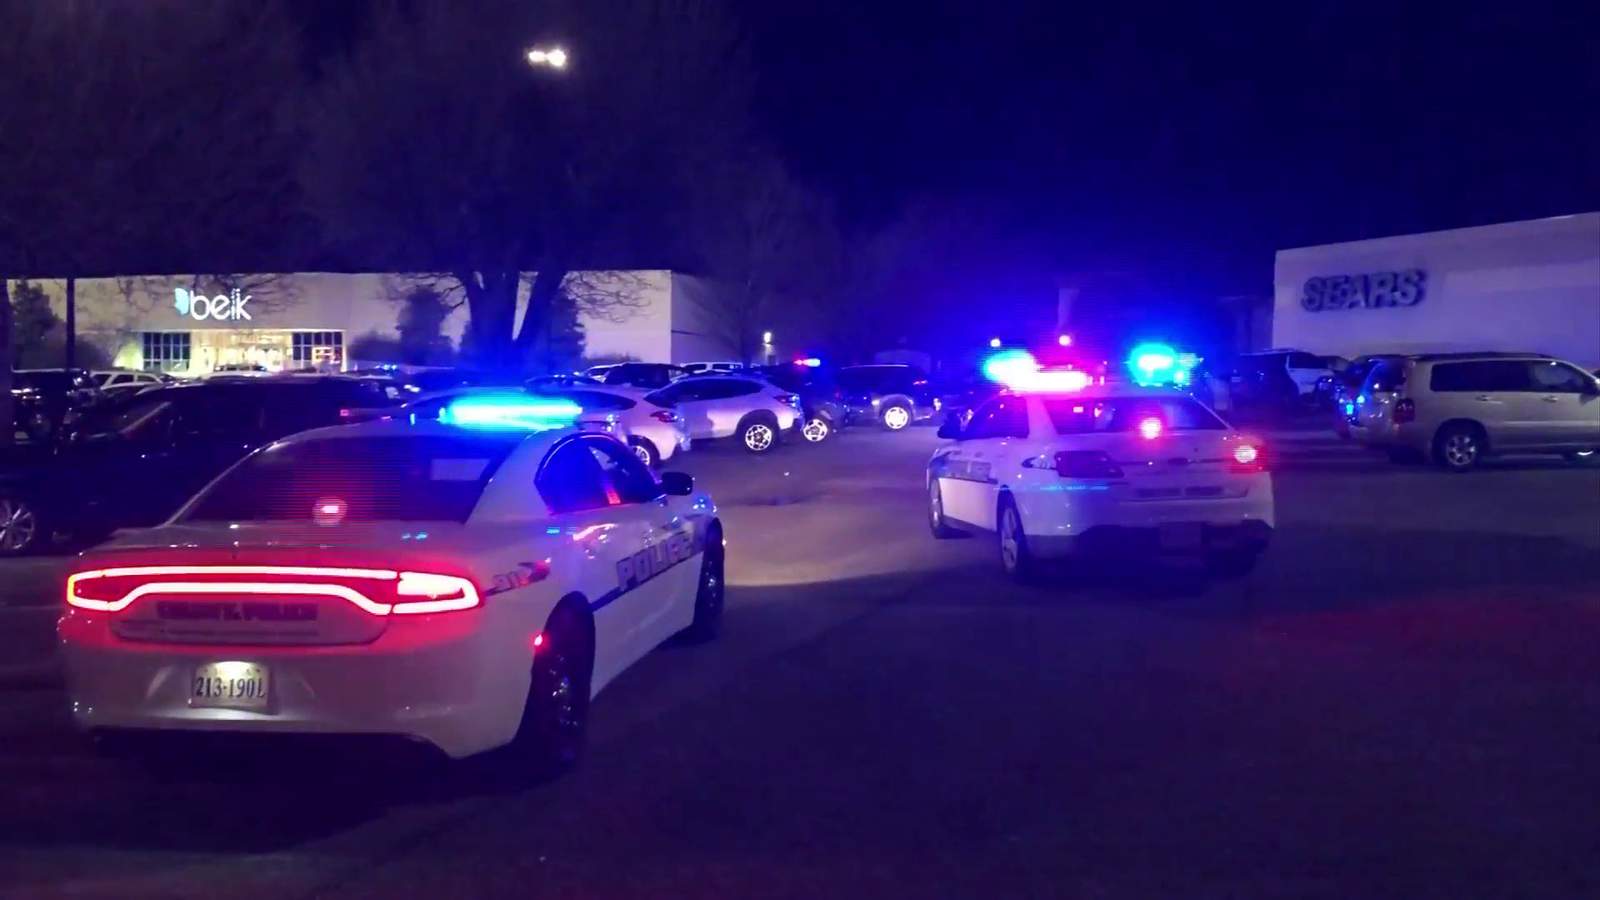 One person hospitalized after argument led to shooting at Valley View Mall